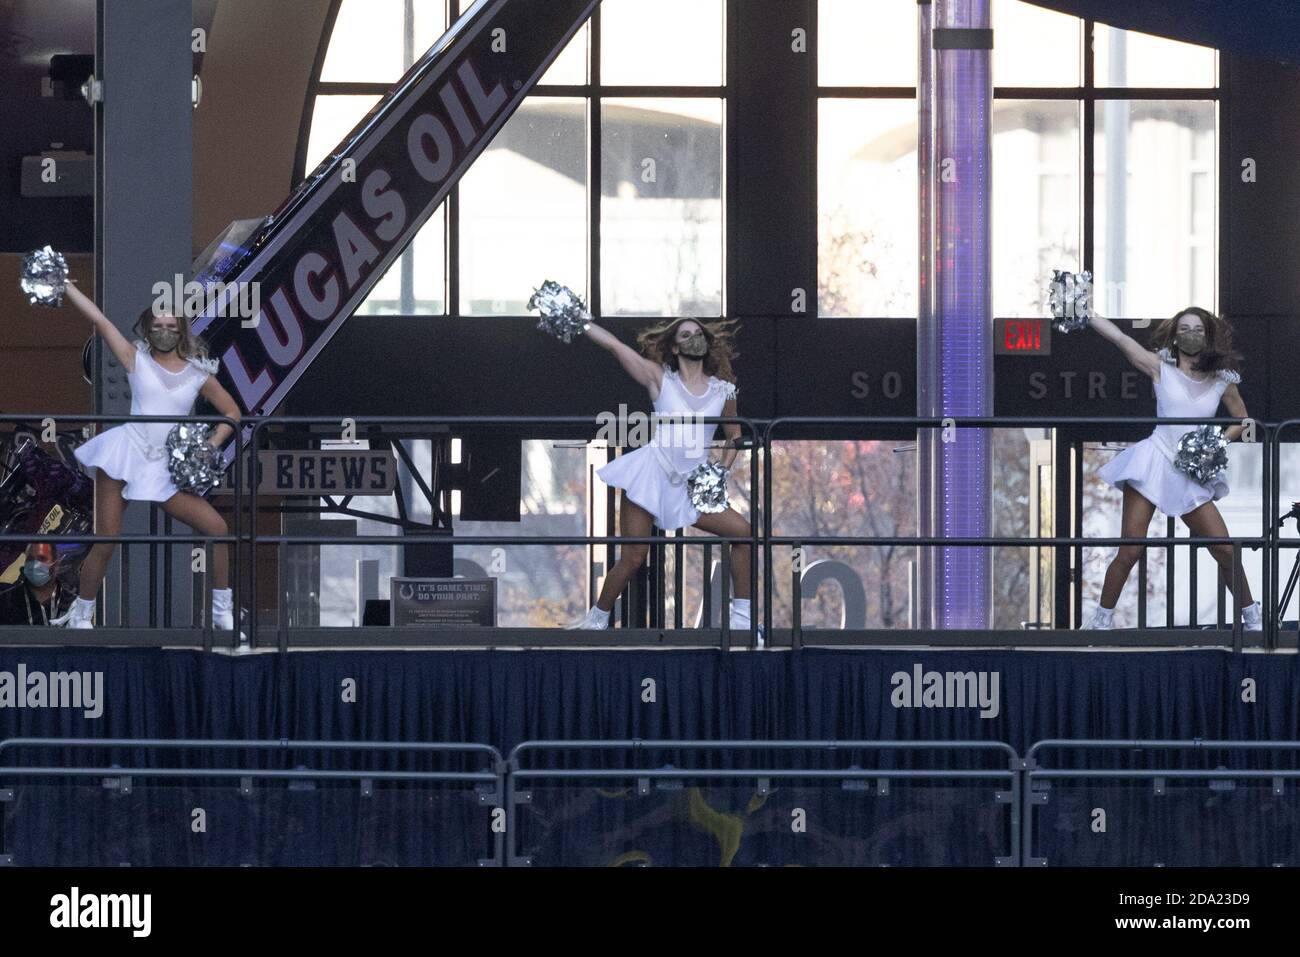 Indianapolis, Indiana, USA. 8th Nov, 2020. Indianapolis Colts cheerleaders cheer from the upper deck during the game between the Baltimore Ravens and the Indianapolis Colts at Lucas Oil Stadium, Indianapolis, Indiana. Credit: Scott Stuart/ZUMA Wire/Alamy Live News Stock Photo